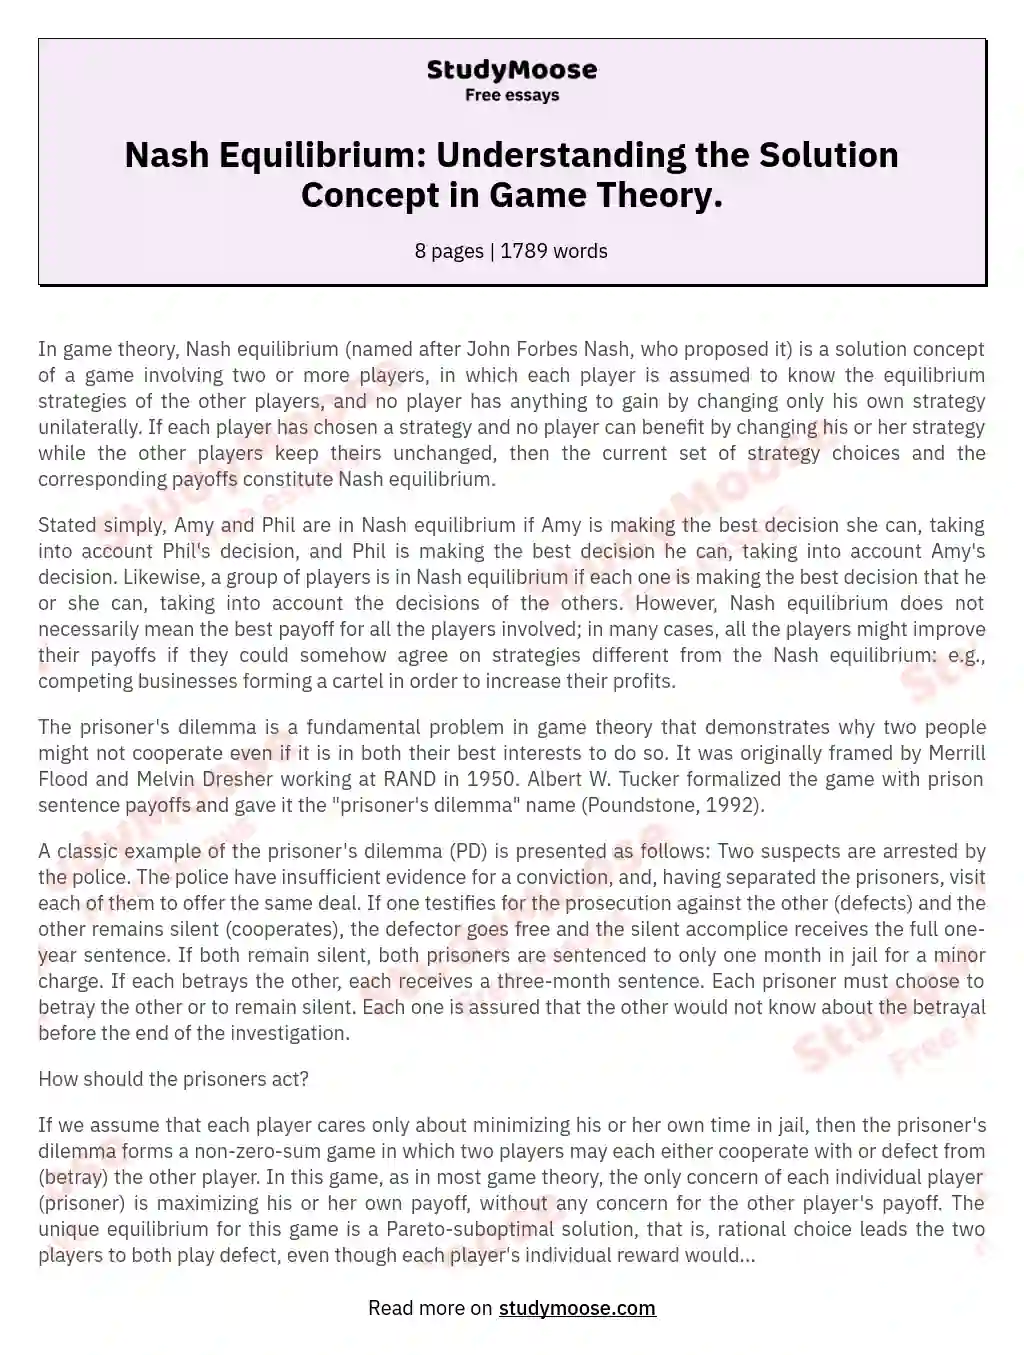 Nash Equilibrium: Understanding the Solution Concept in Game Theory.